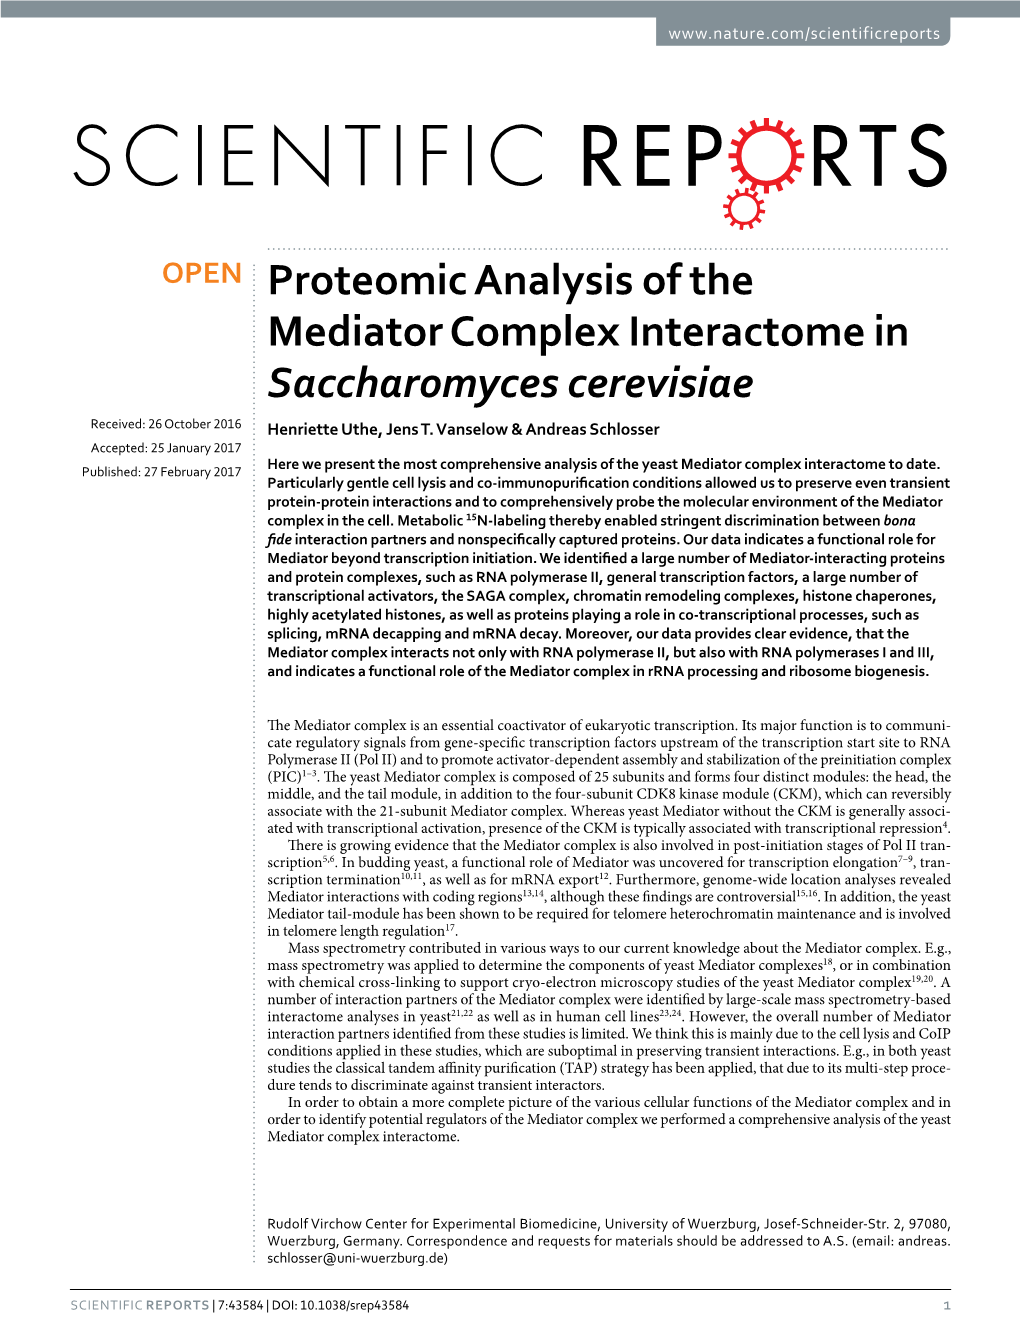 Proteomic Analysis of the Mediator Complex Interactome in Saccharomyces Cerevisiae Received: 26 October 2016 Henriette Uthe, Jens T